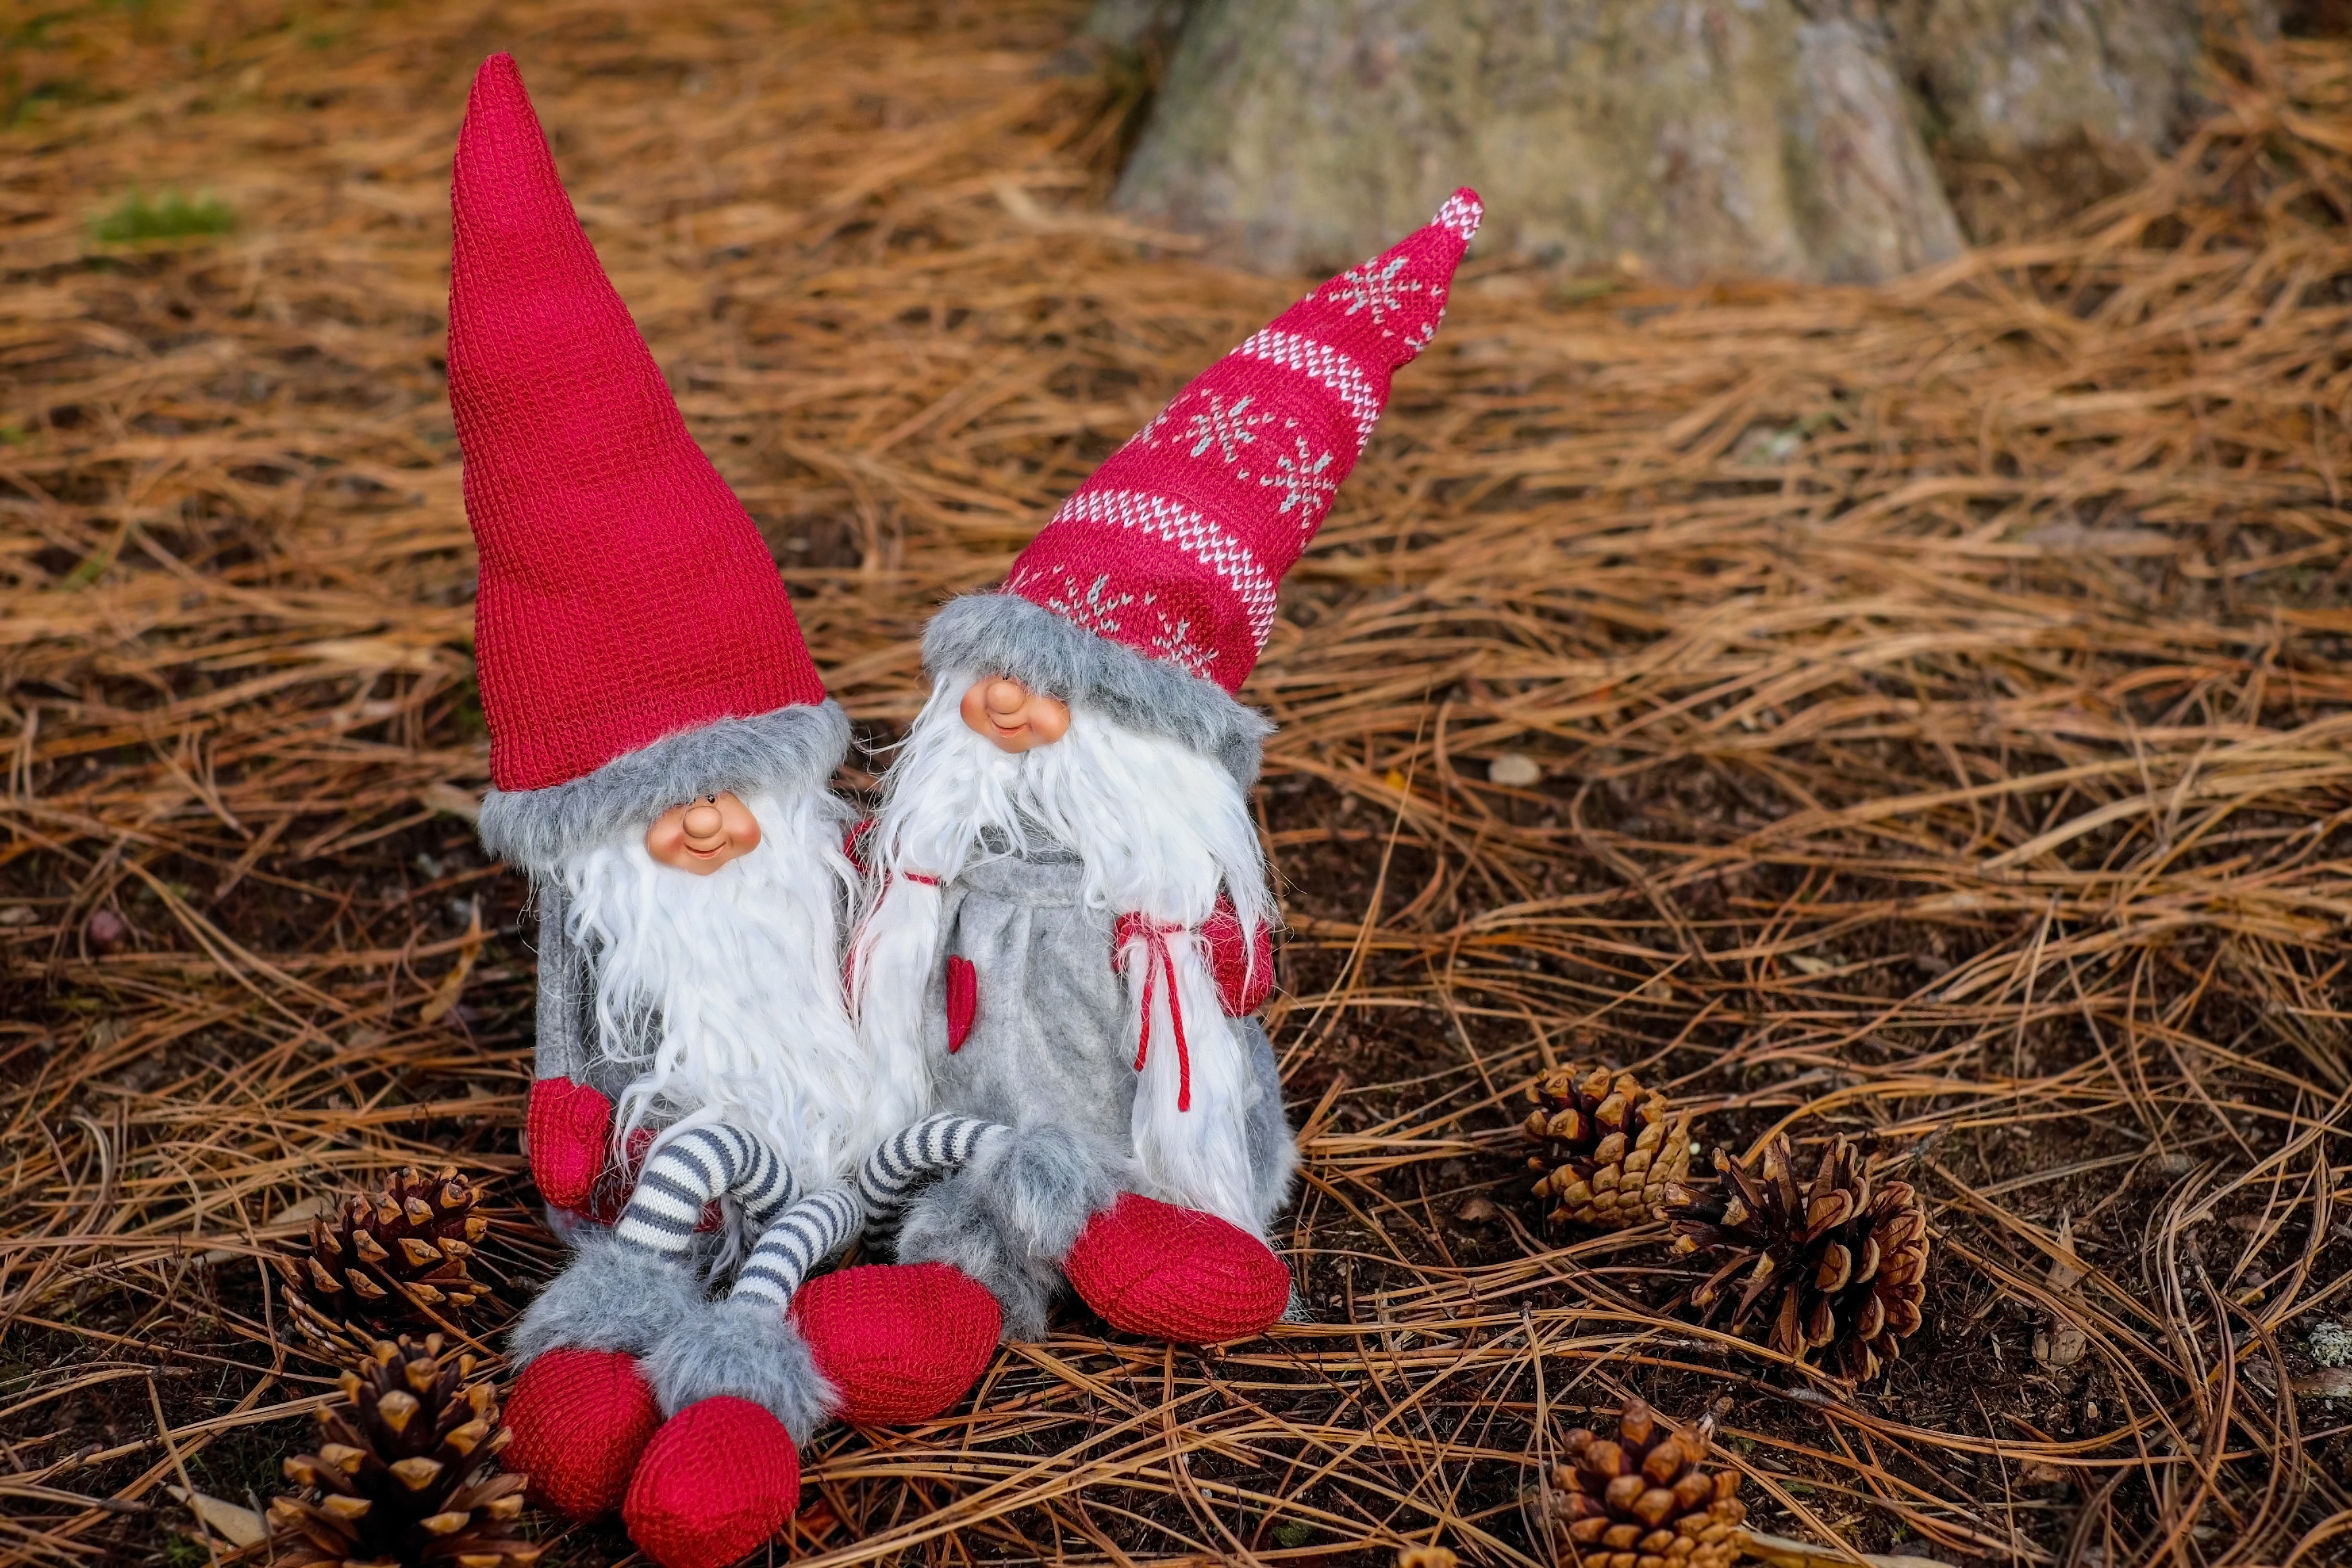 two dwarf in red hat plush toy